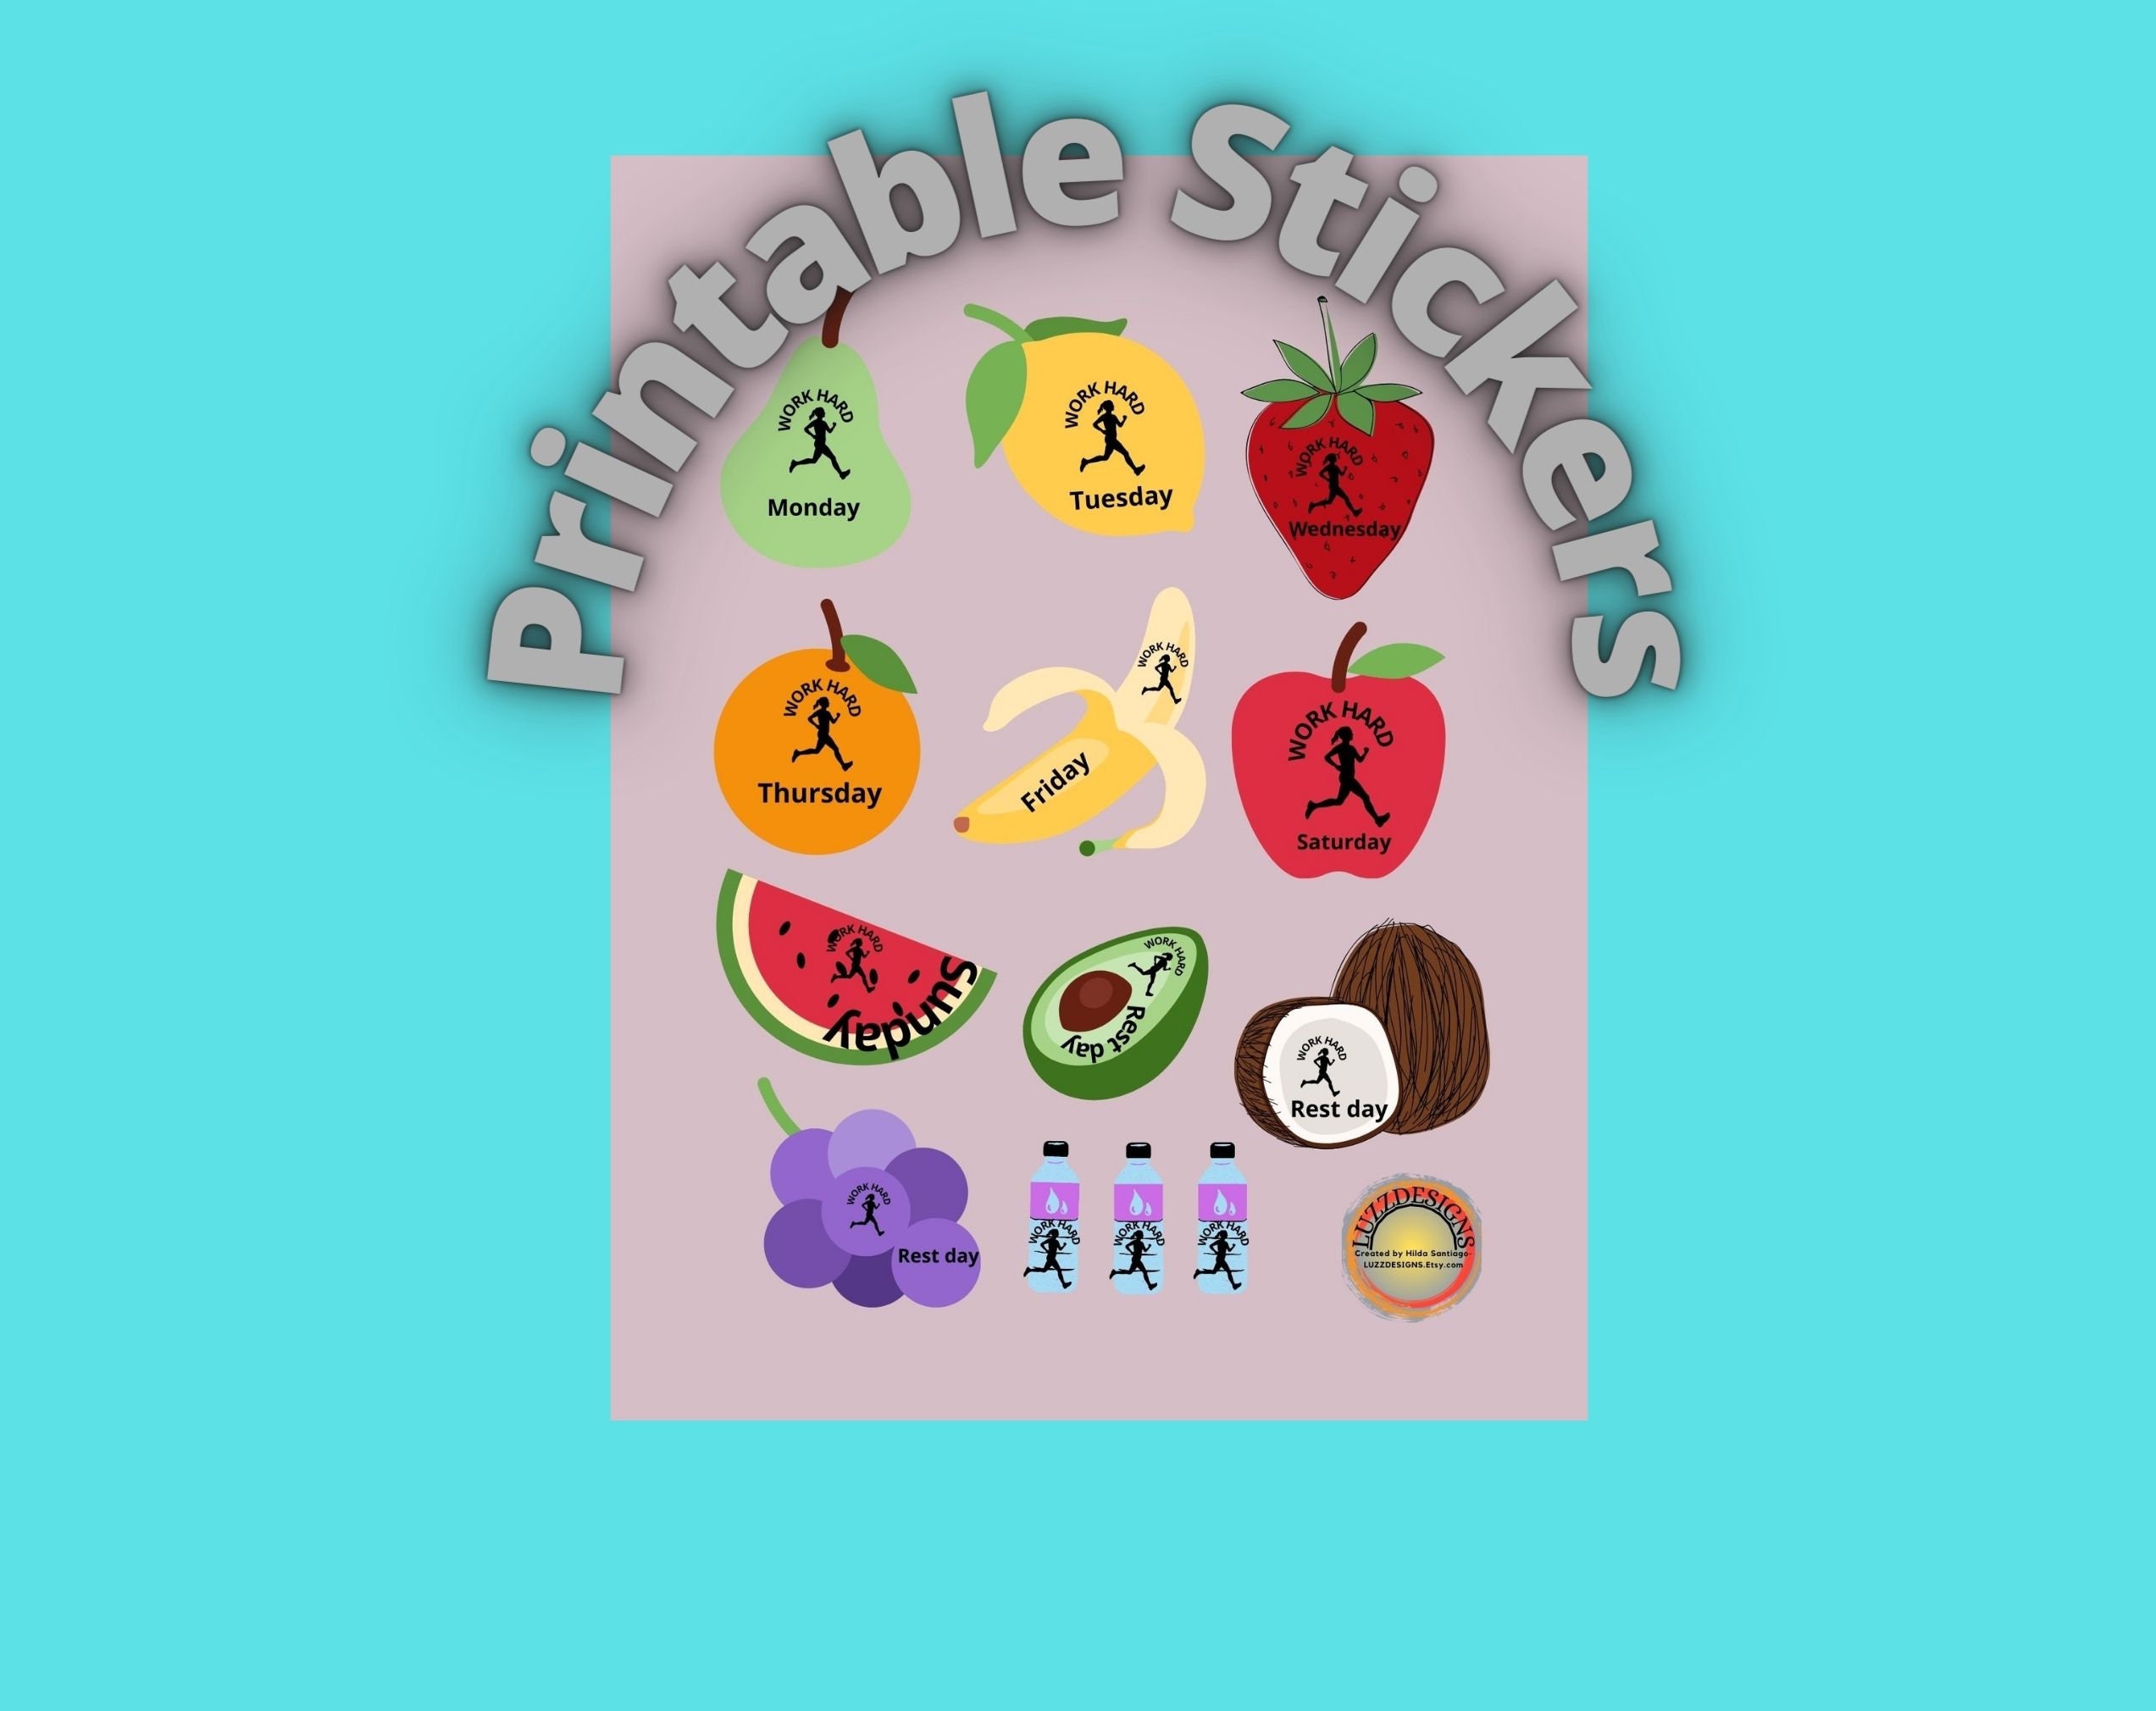 Print and Cut Yoga Stickers, Planner Stickers, Kids Stickers, Exercise  Stickers, Fitness Stickers, Printable Stickers, Workout Stickers, DIY